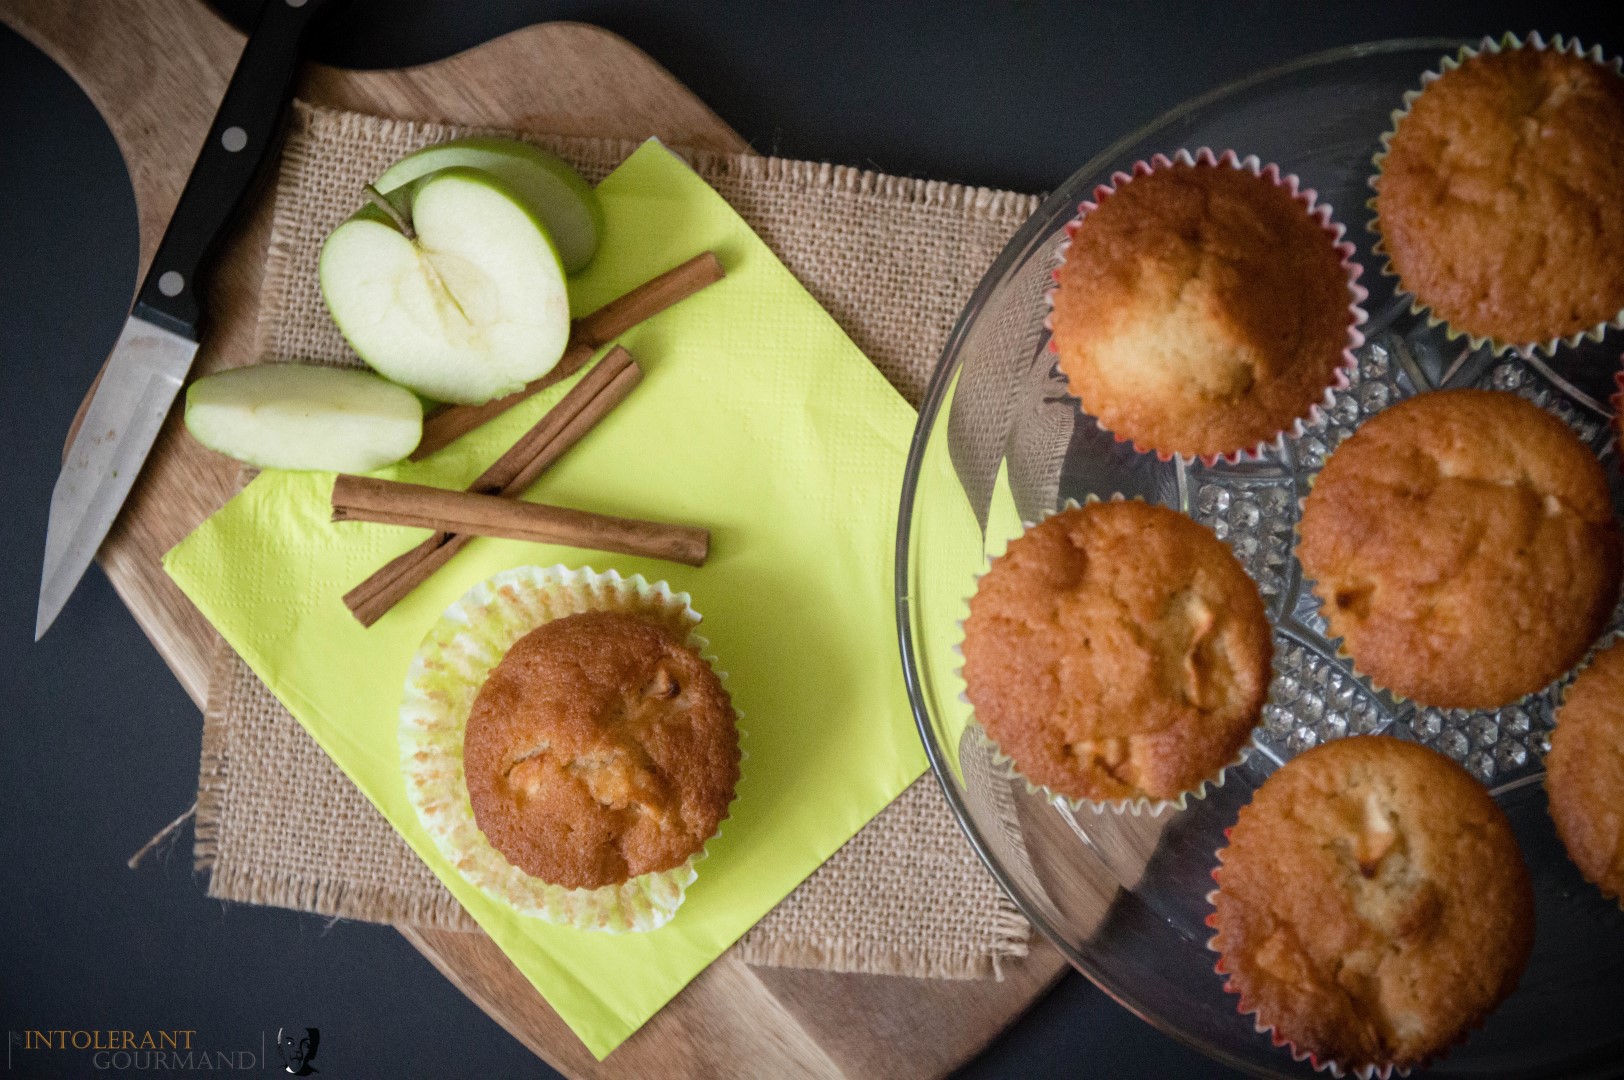 Apple Muffins gluten free and vegan - a deliciously light sponge with the warming flavours from cinnamon and other spices and the healthy and naturally sweet apples! www.intolerantgourmand.com